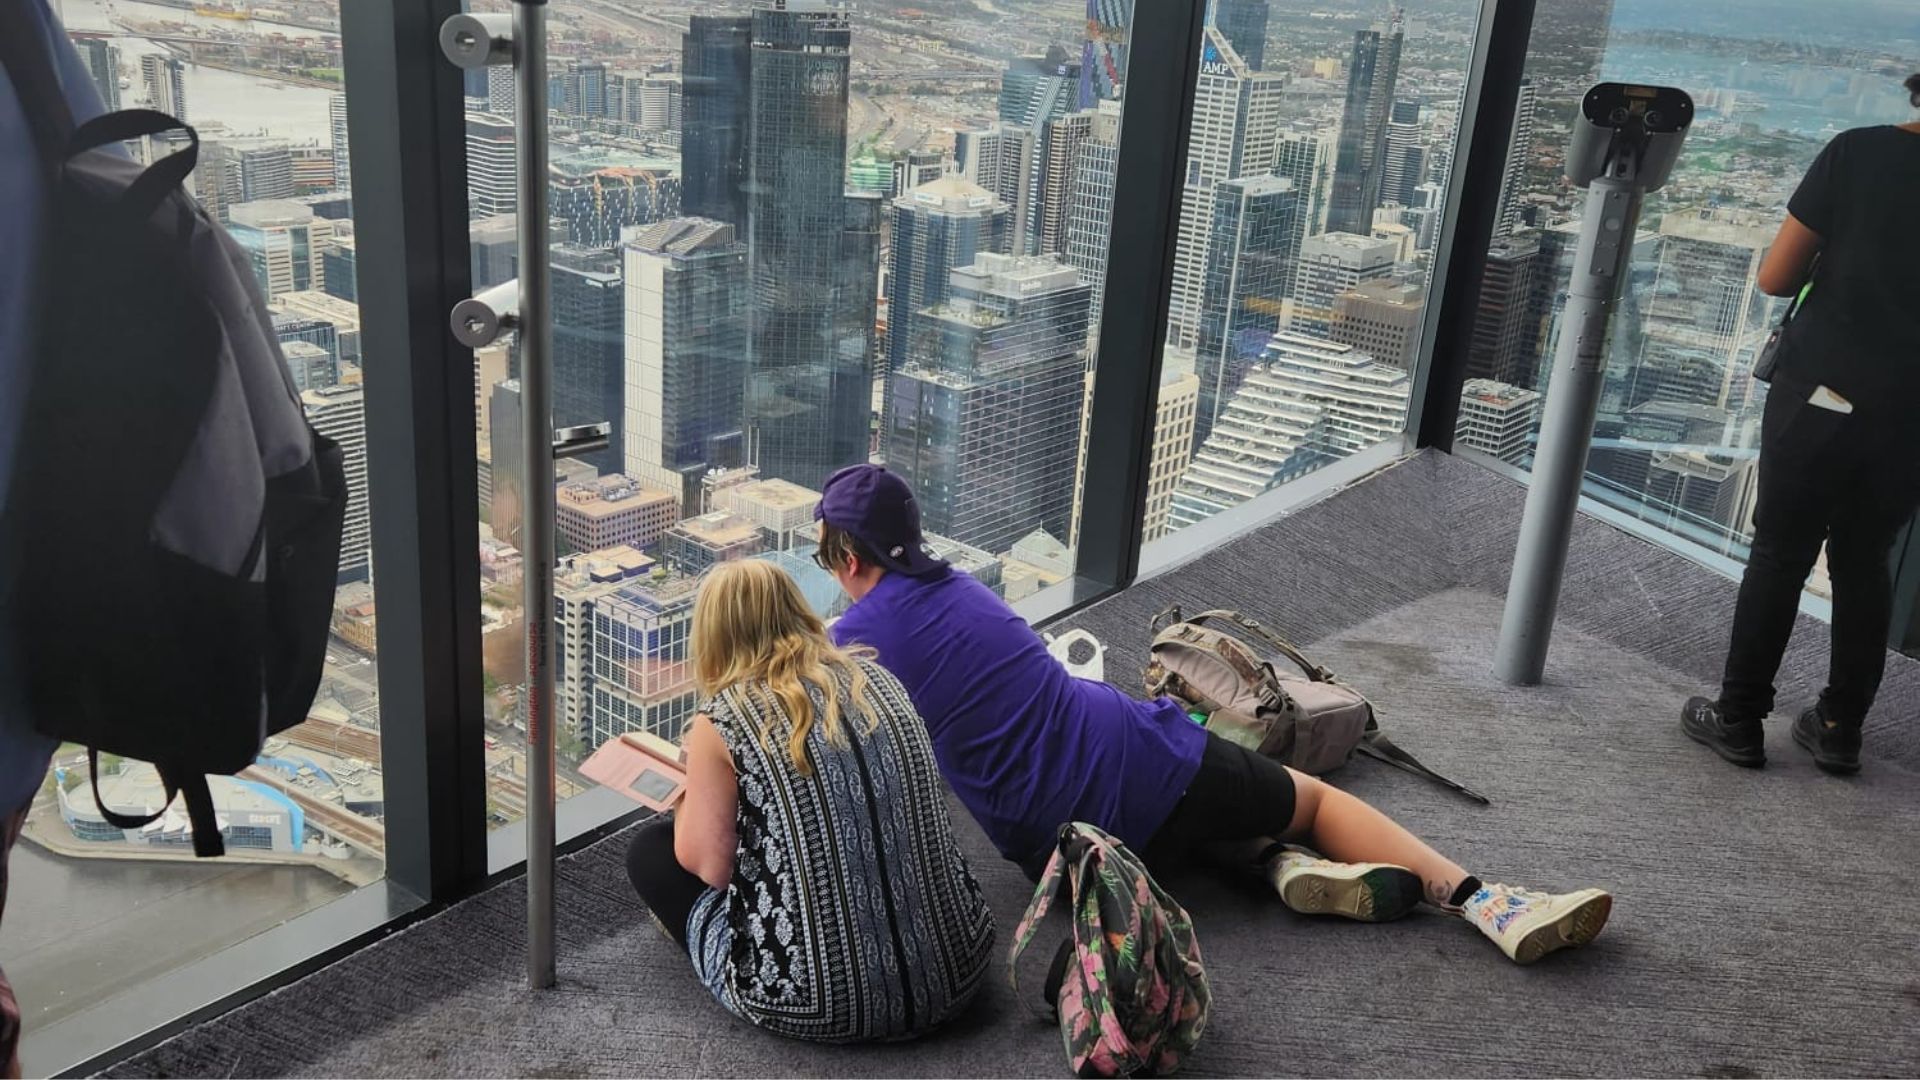 Participant and Volunteer staring out of a high-rise building window onto the city below.